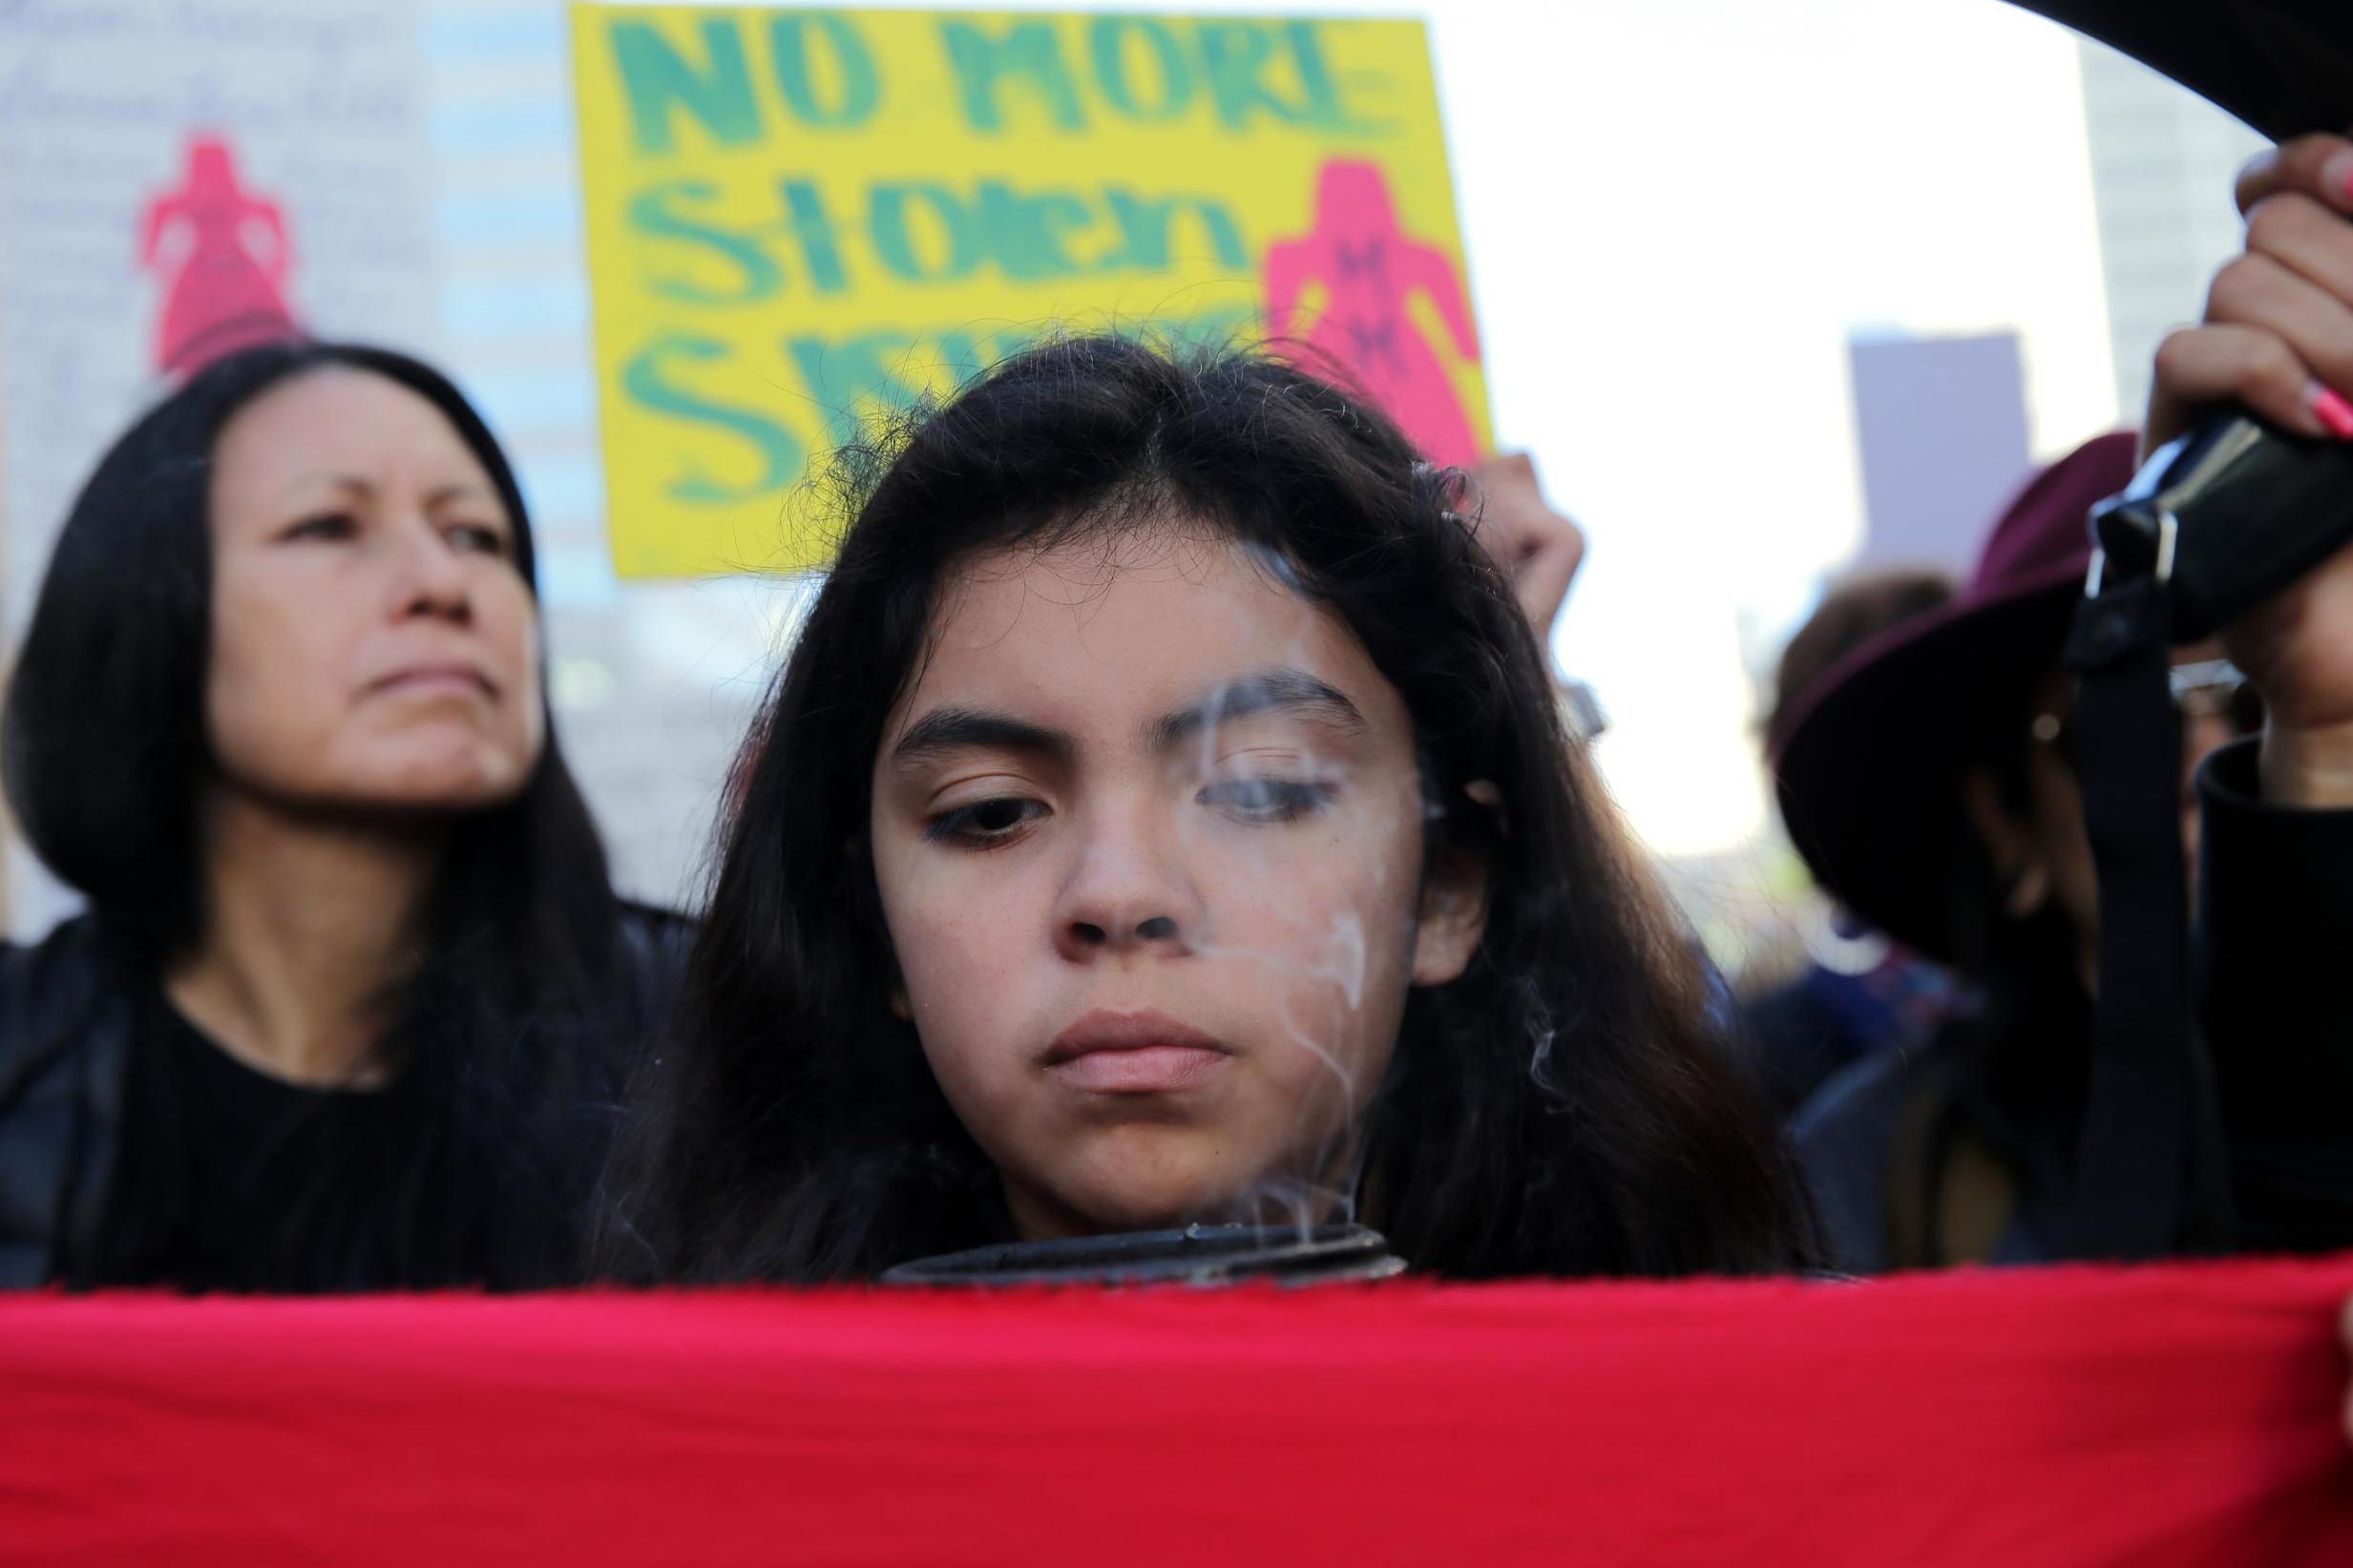 A young activist marches for missing and murdered indigenous women at the Women’s March California 2019